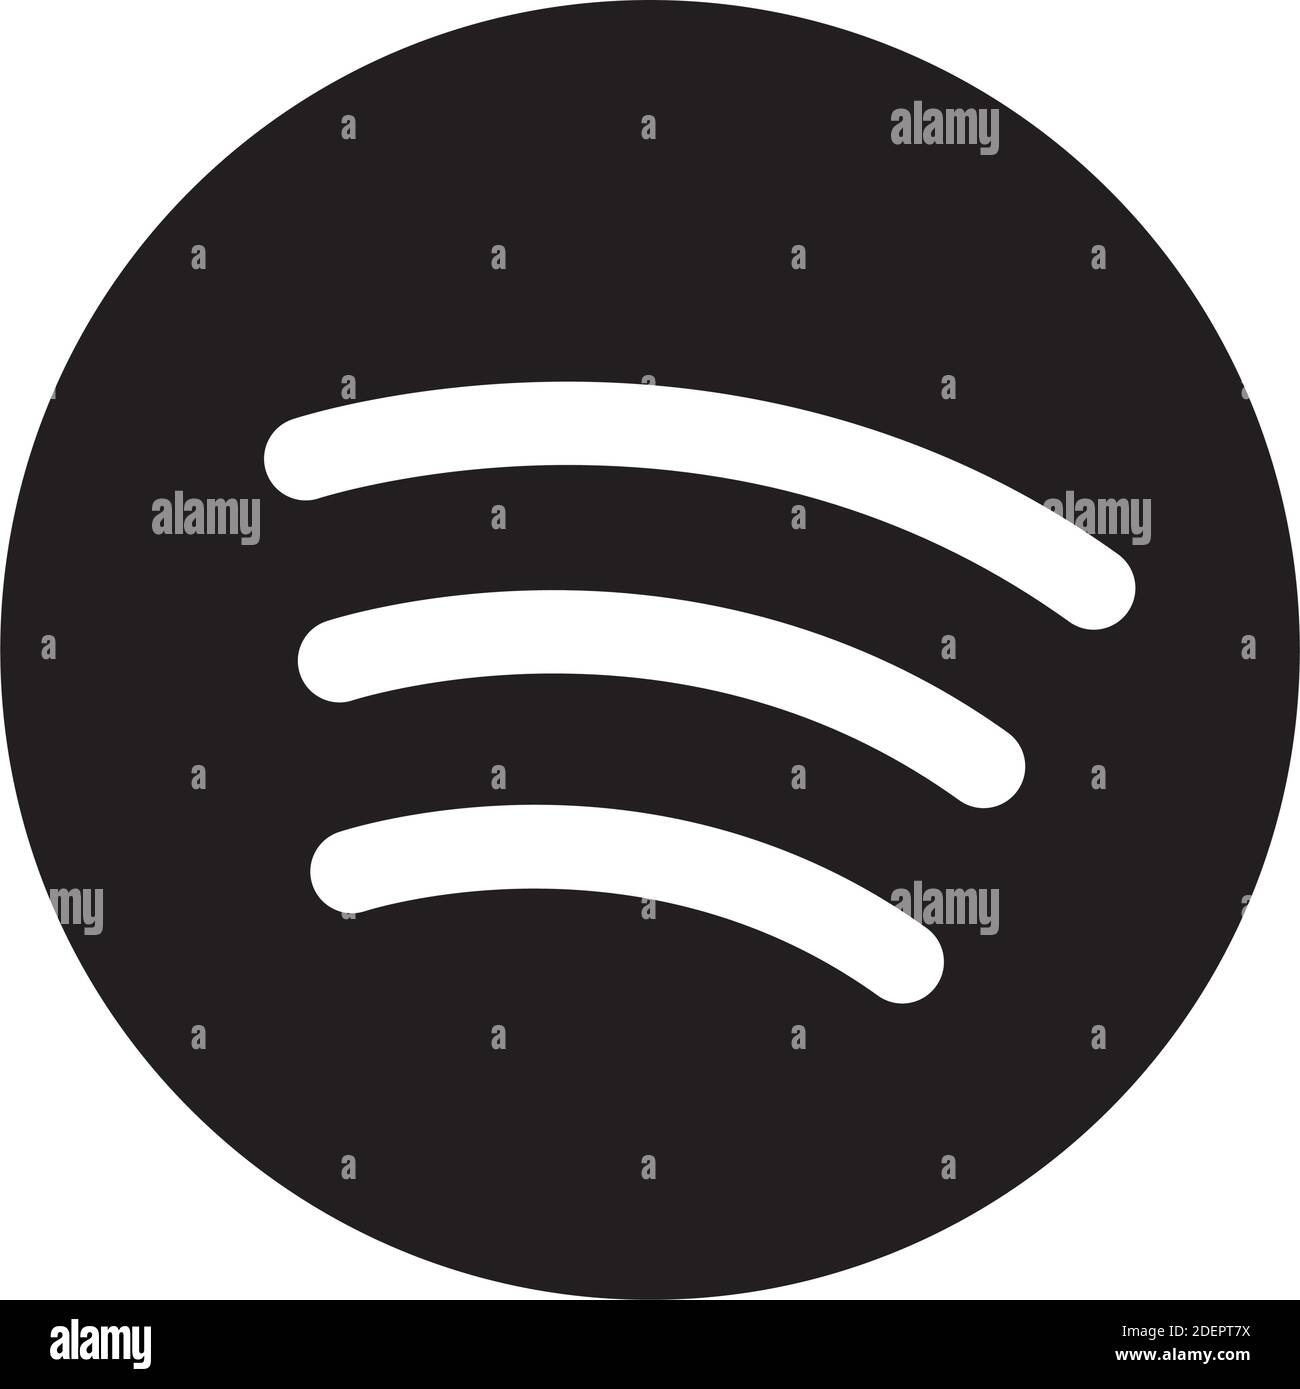 Spotify Black And White Stock Photos Images Alamy